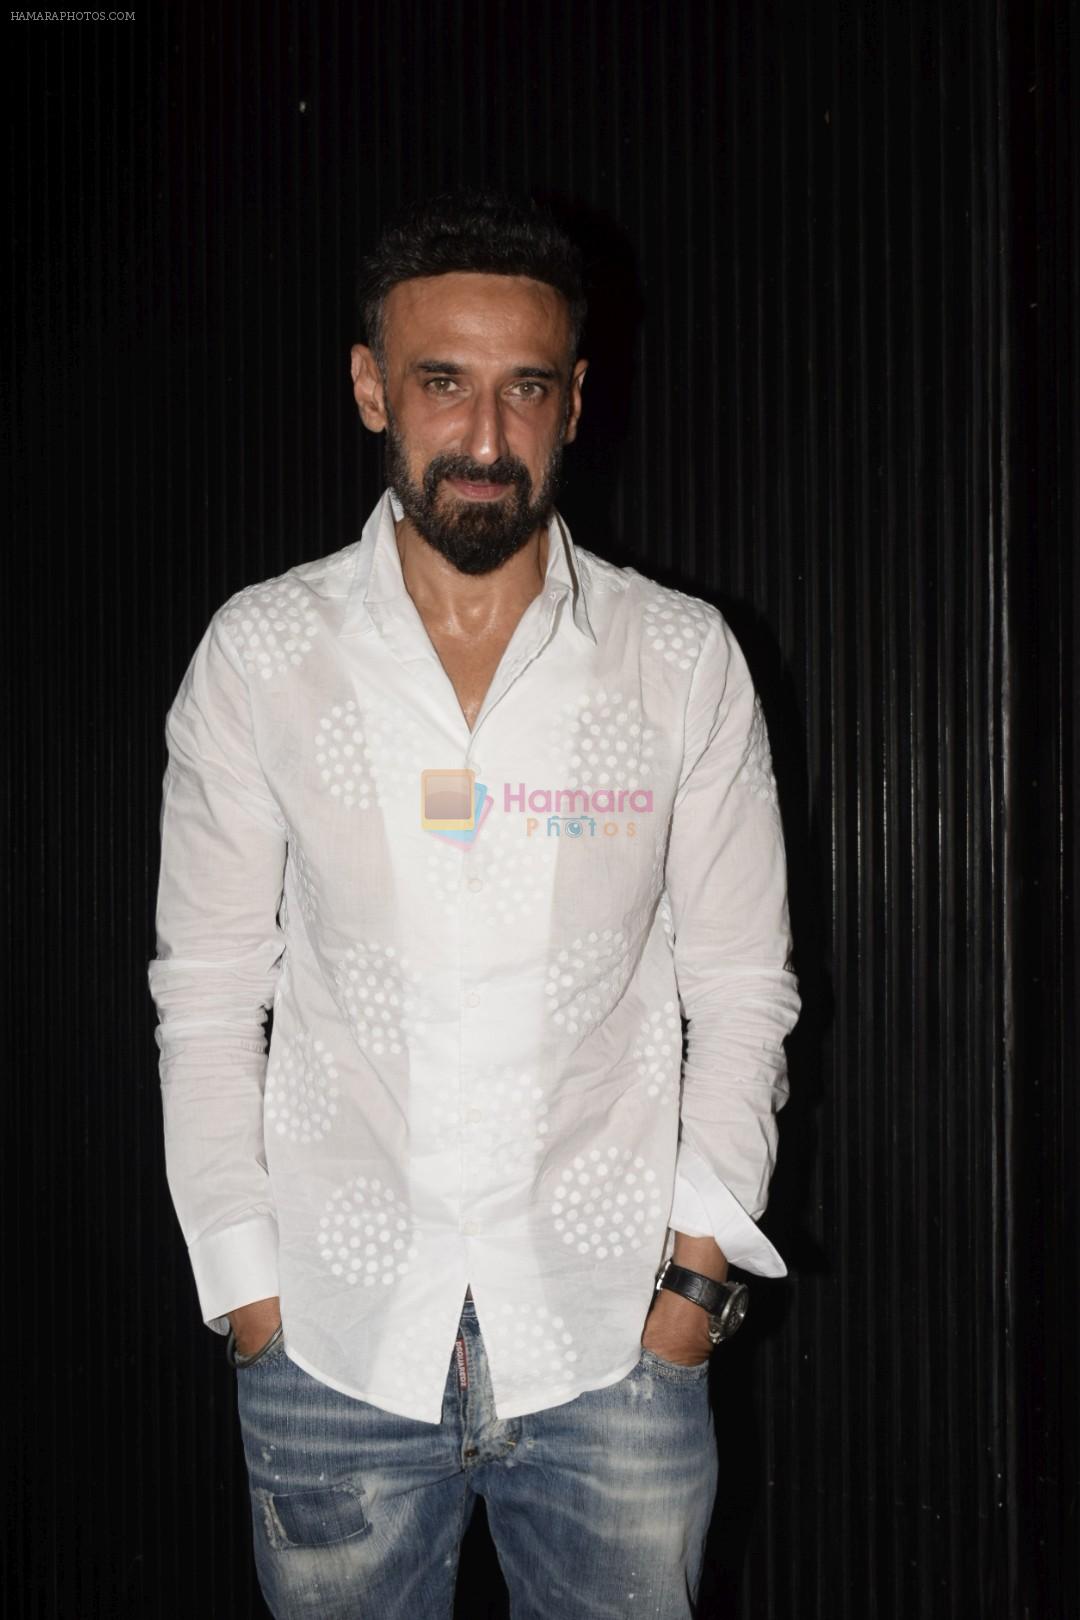 Rahul Dev at the Launch Of Ludo King Music Video in Hard Rock Cafe In Andheri on 23rd Oct 2018